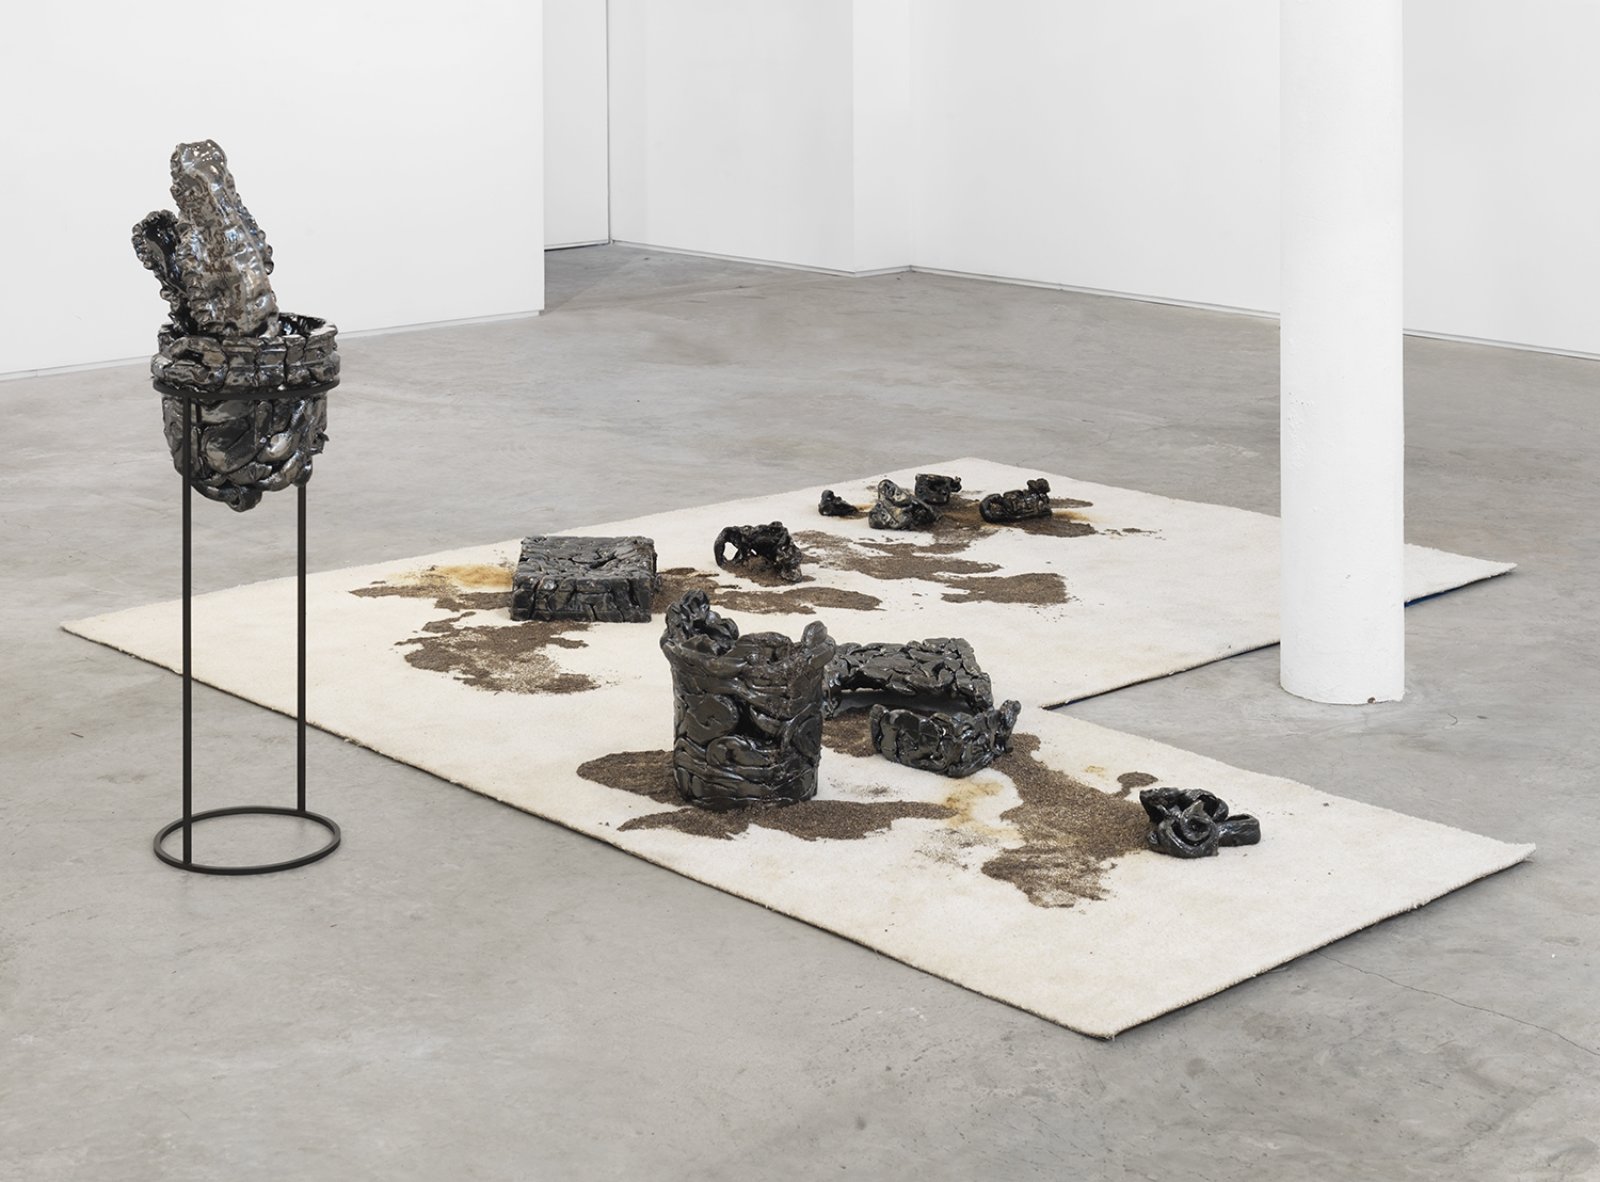 Rochelle Goldberg, The element of stain, 2015, metallic glazed ceramic elements, carpet, chia seeds, crude oil, dimensions variable